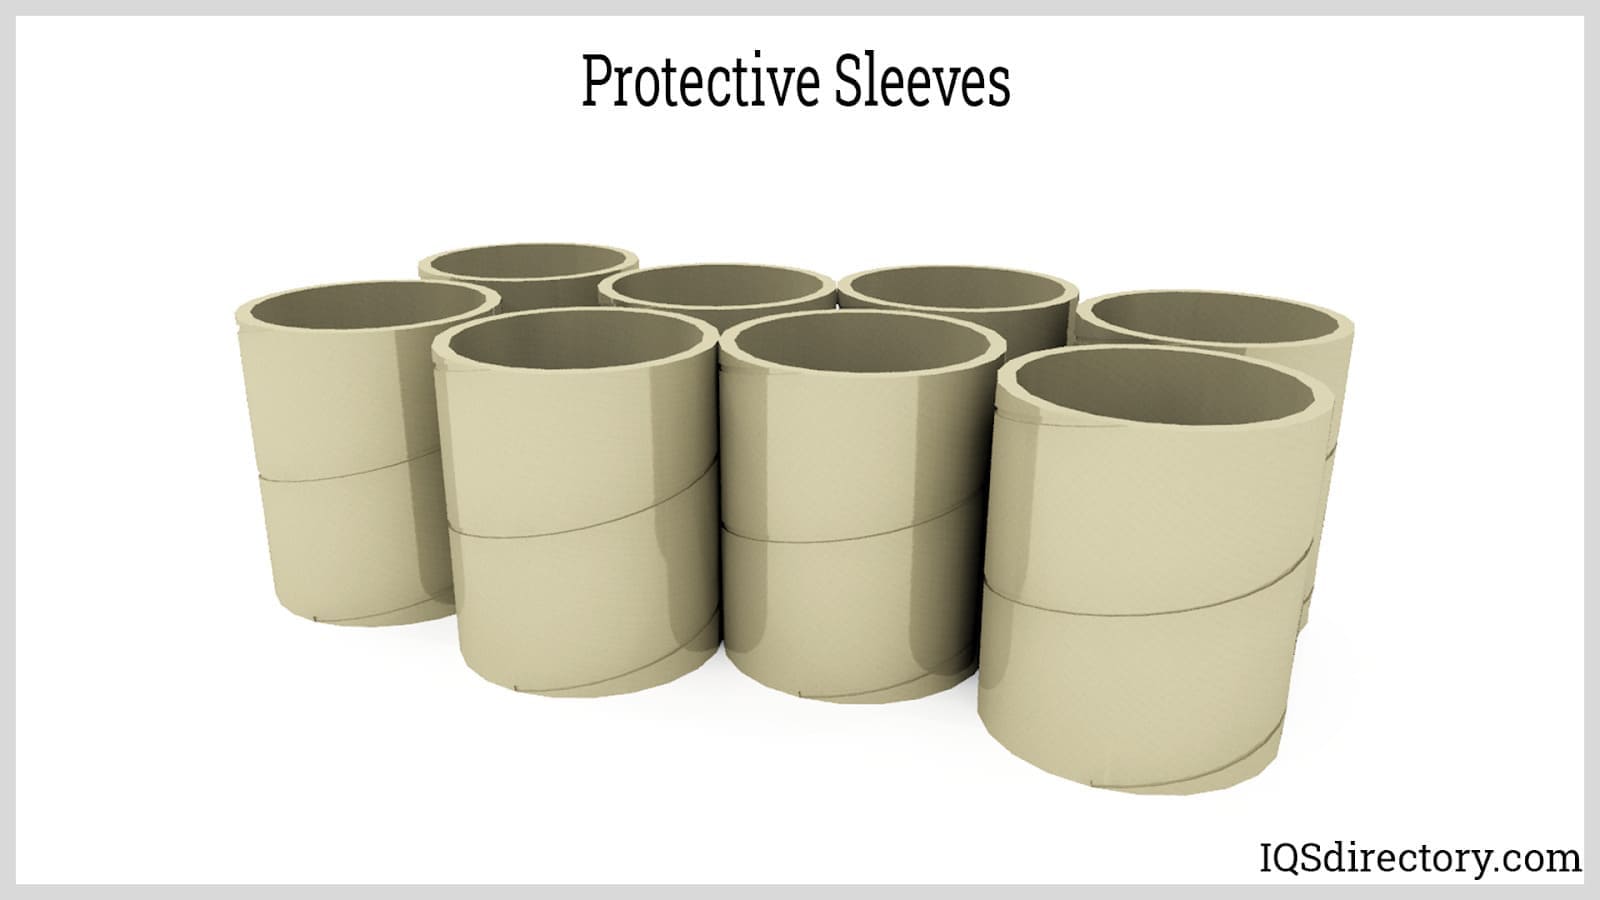 Protective Sleeves